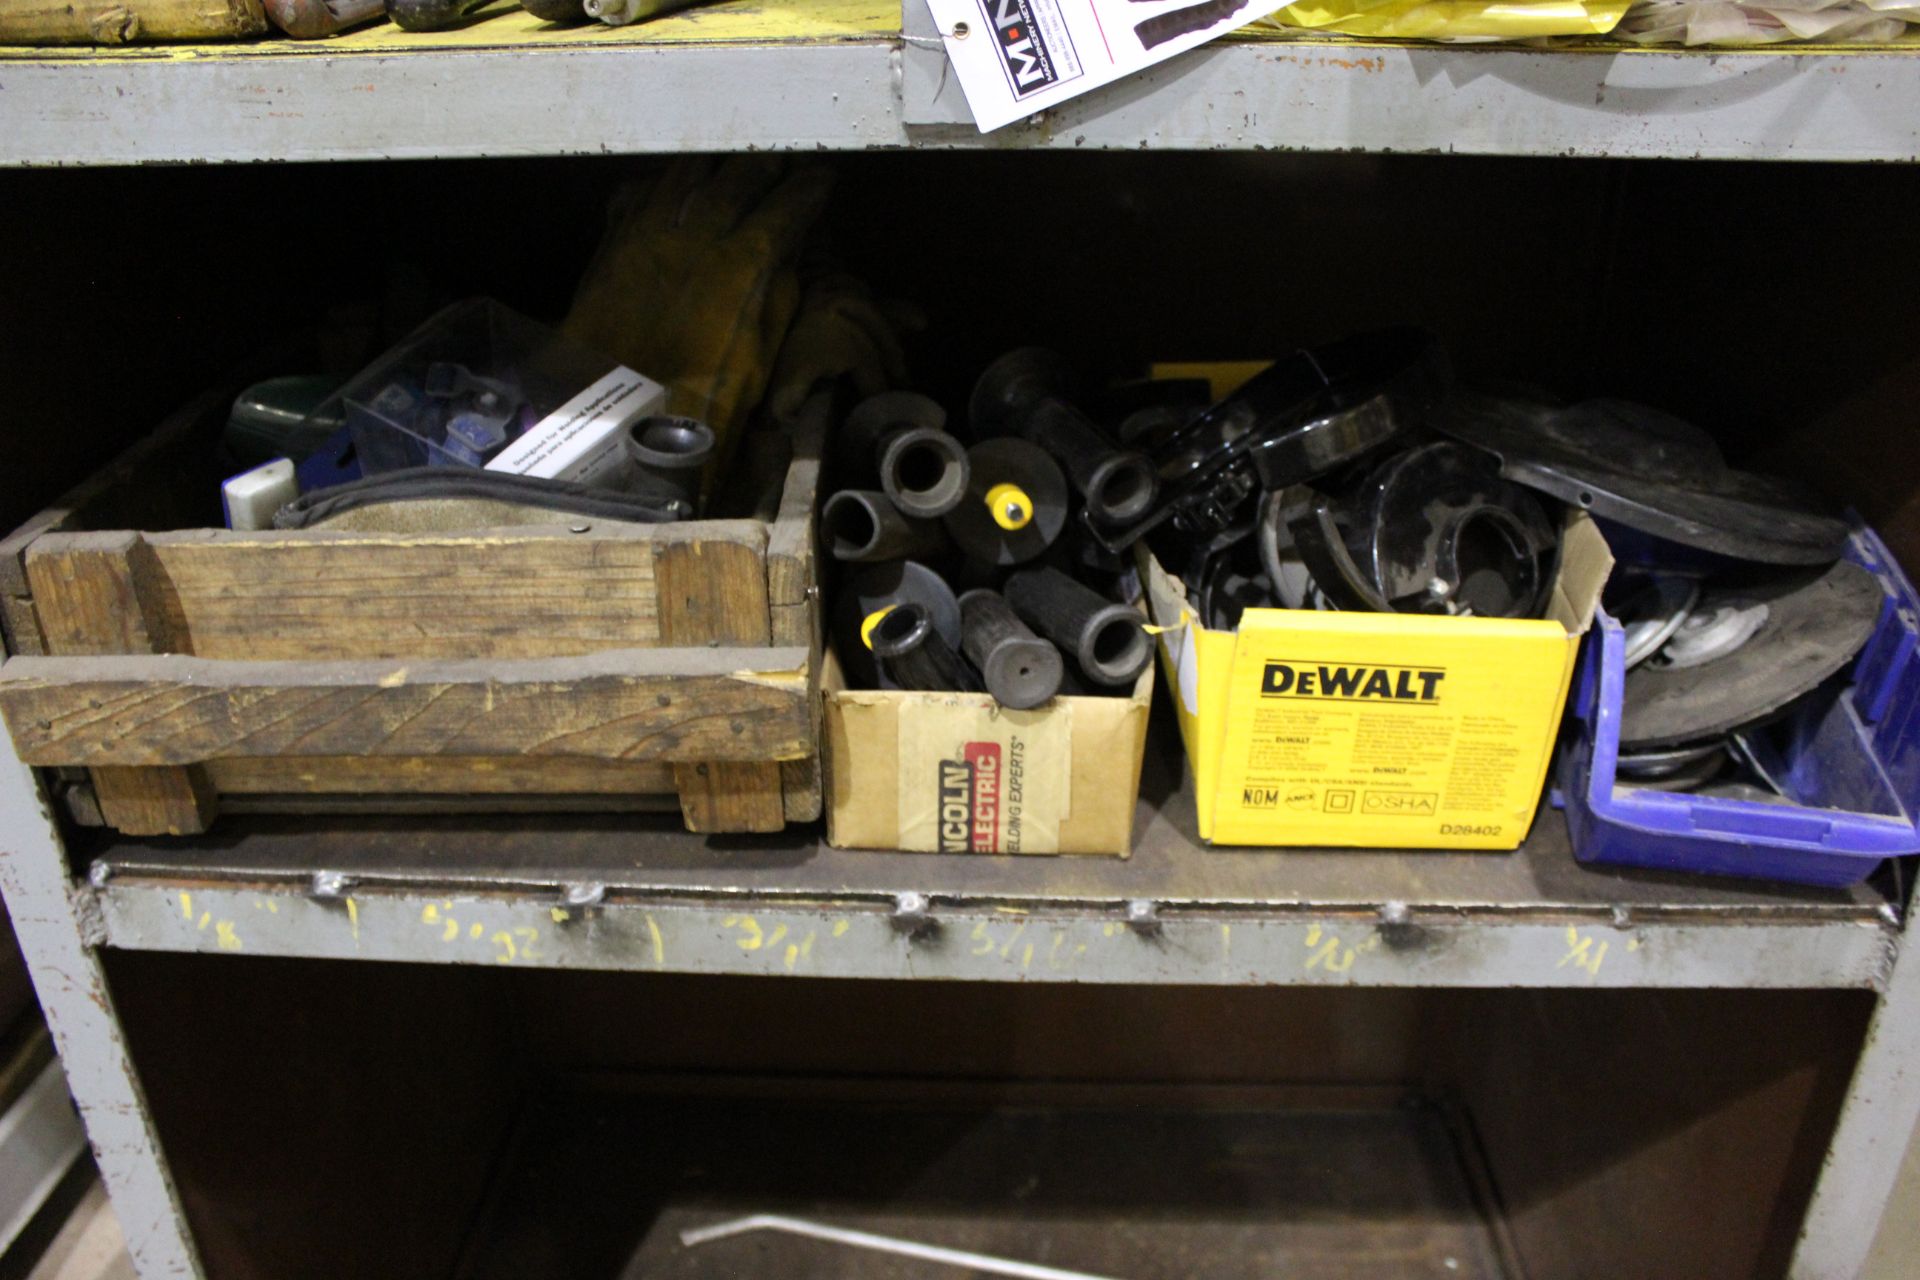 METAL SHELVING UNIT, ASSORTED GRINDER PARTS, DISCS, AND FACE SHIELDS - Image 4 of 5